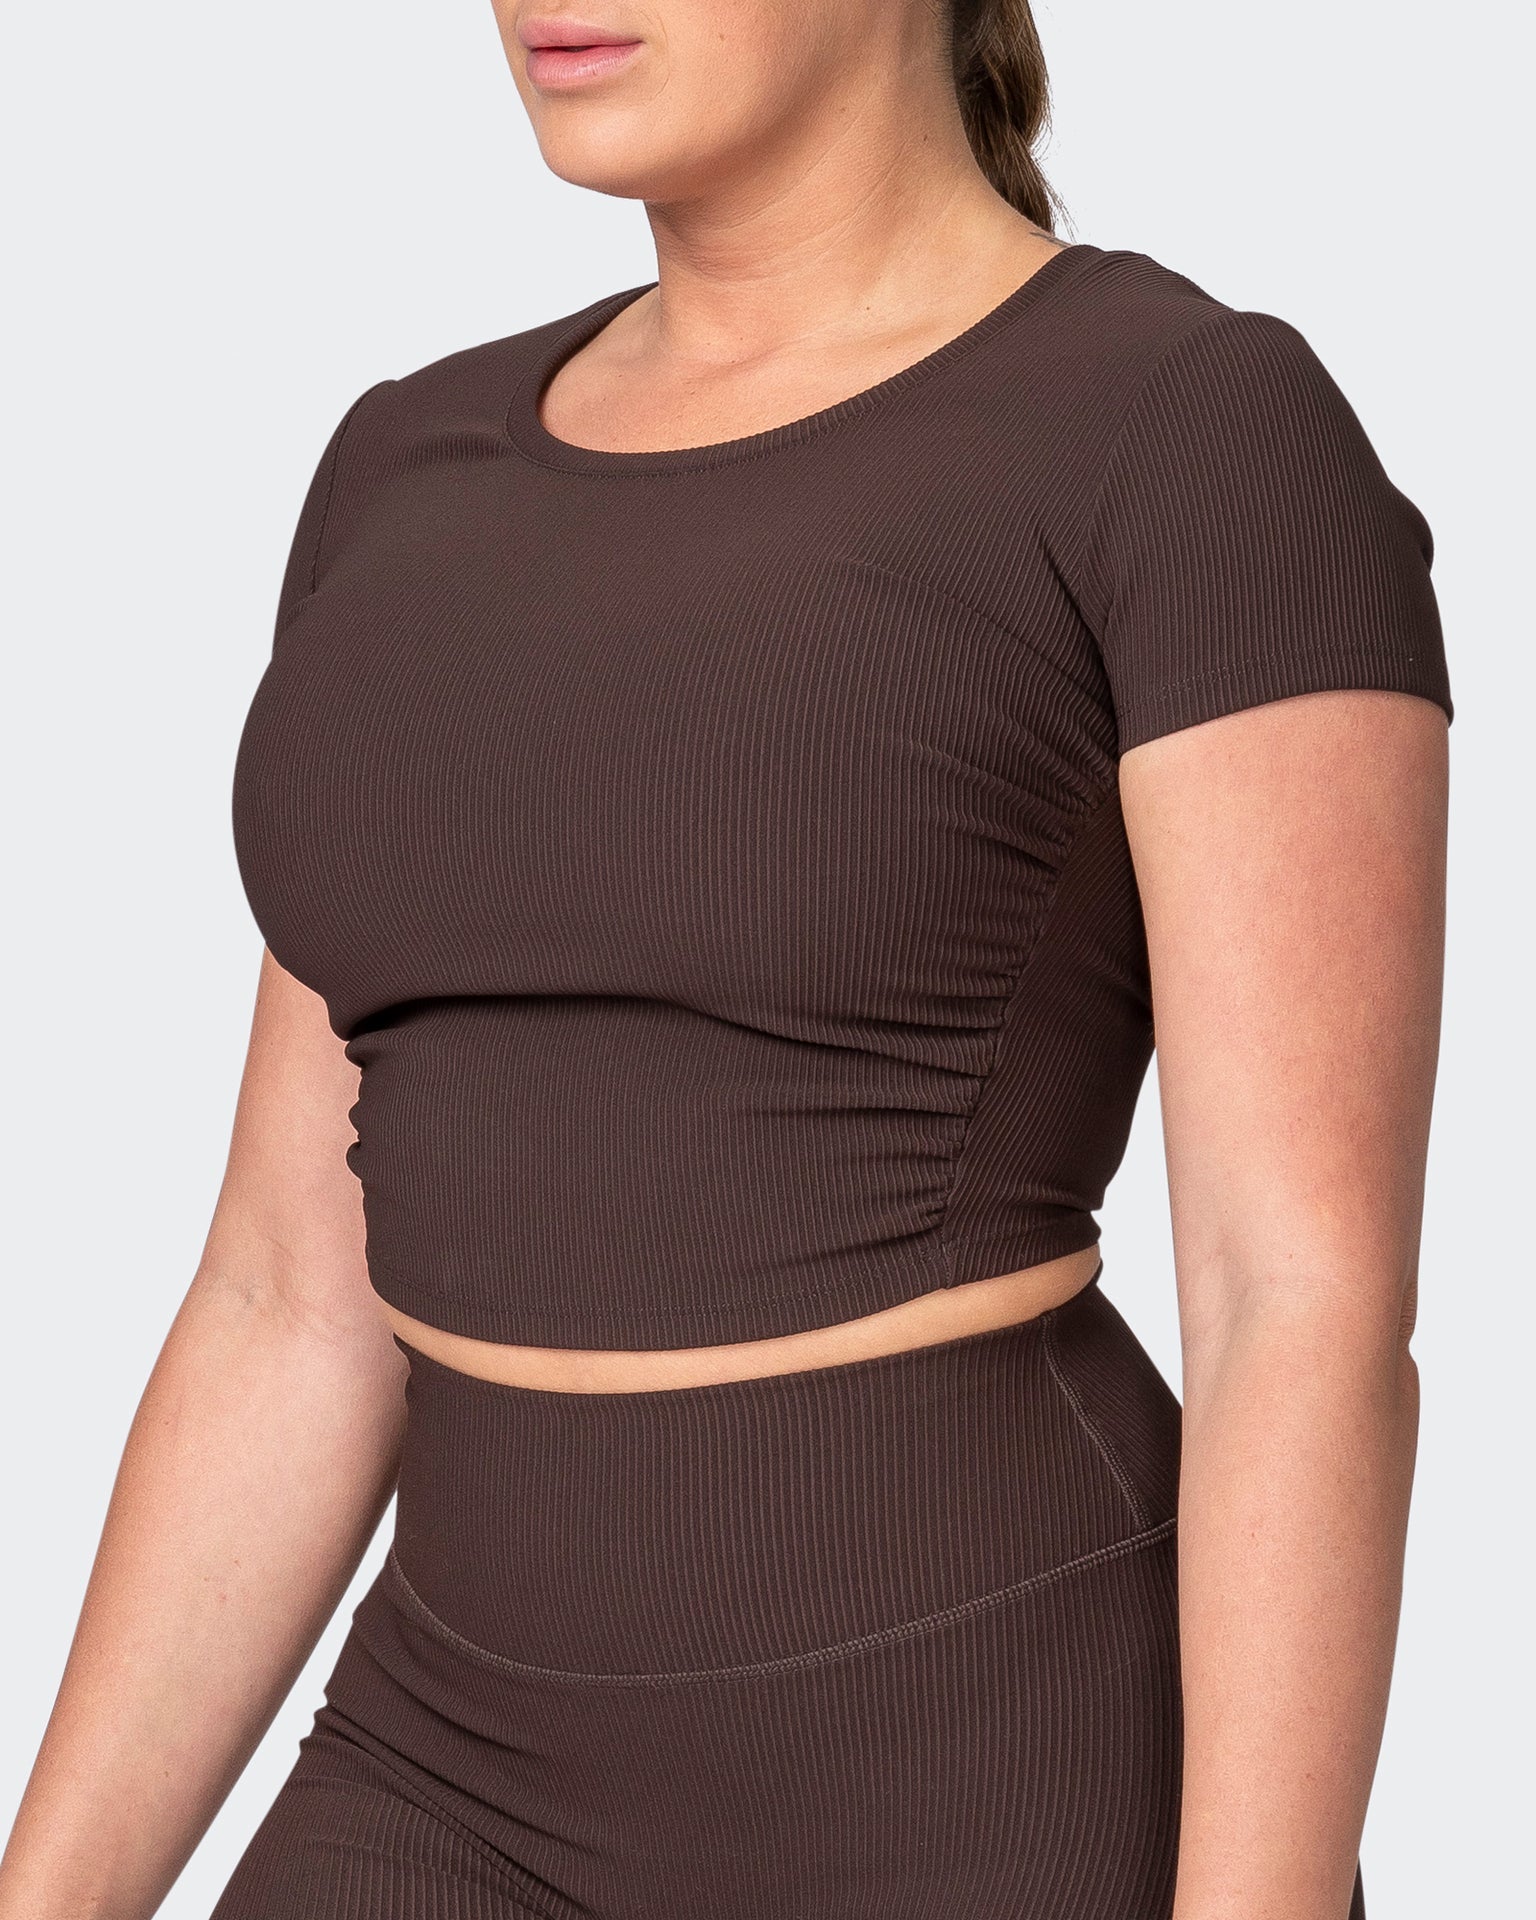 musclenation T-Shirts Rival Cropped Rib Top - Cocoa